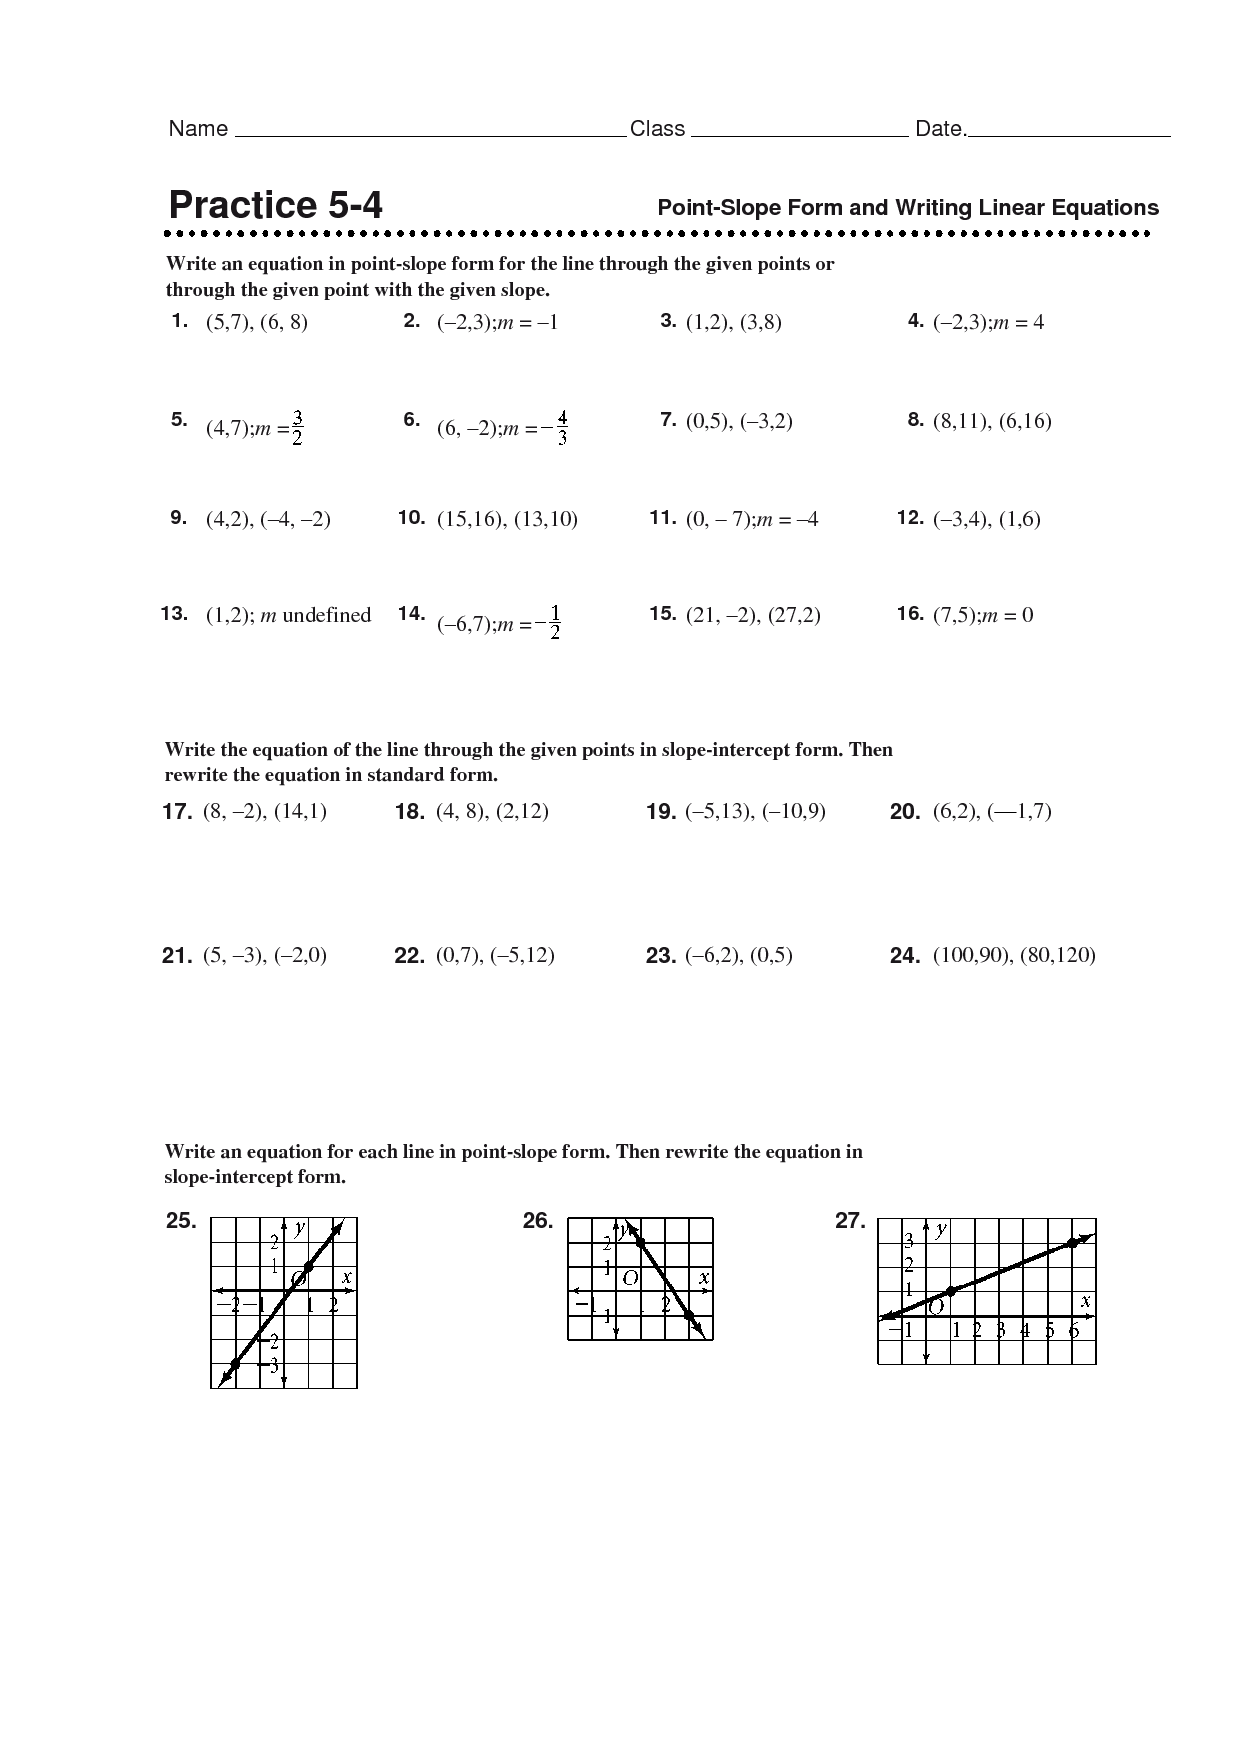 Writing Linear Equations Point-Slope Form Worksheet Image